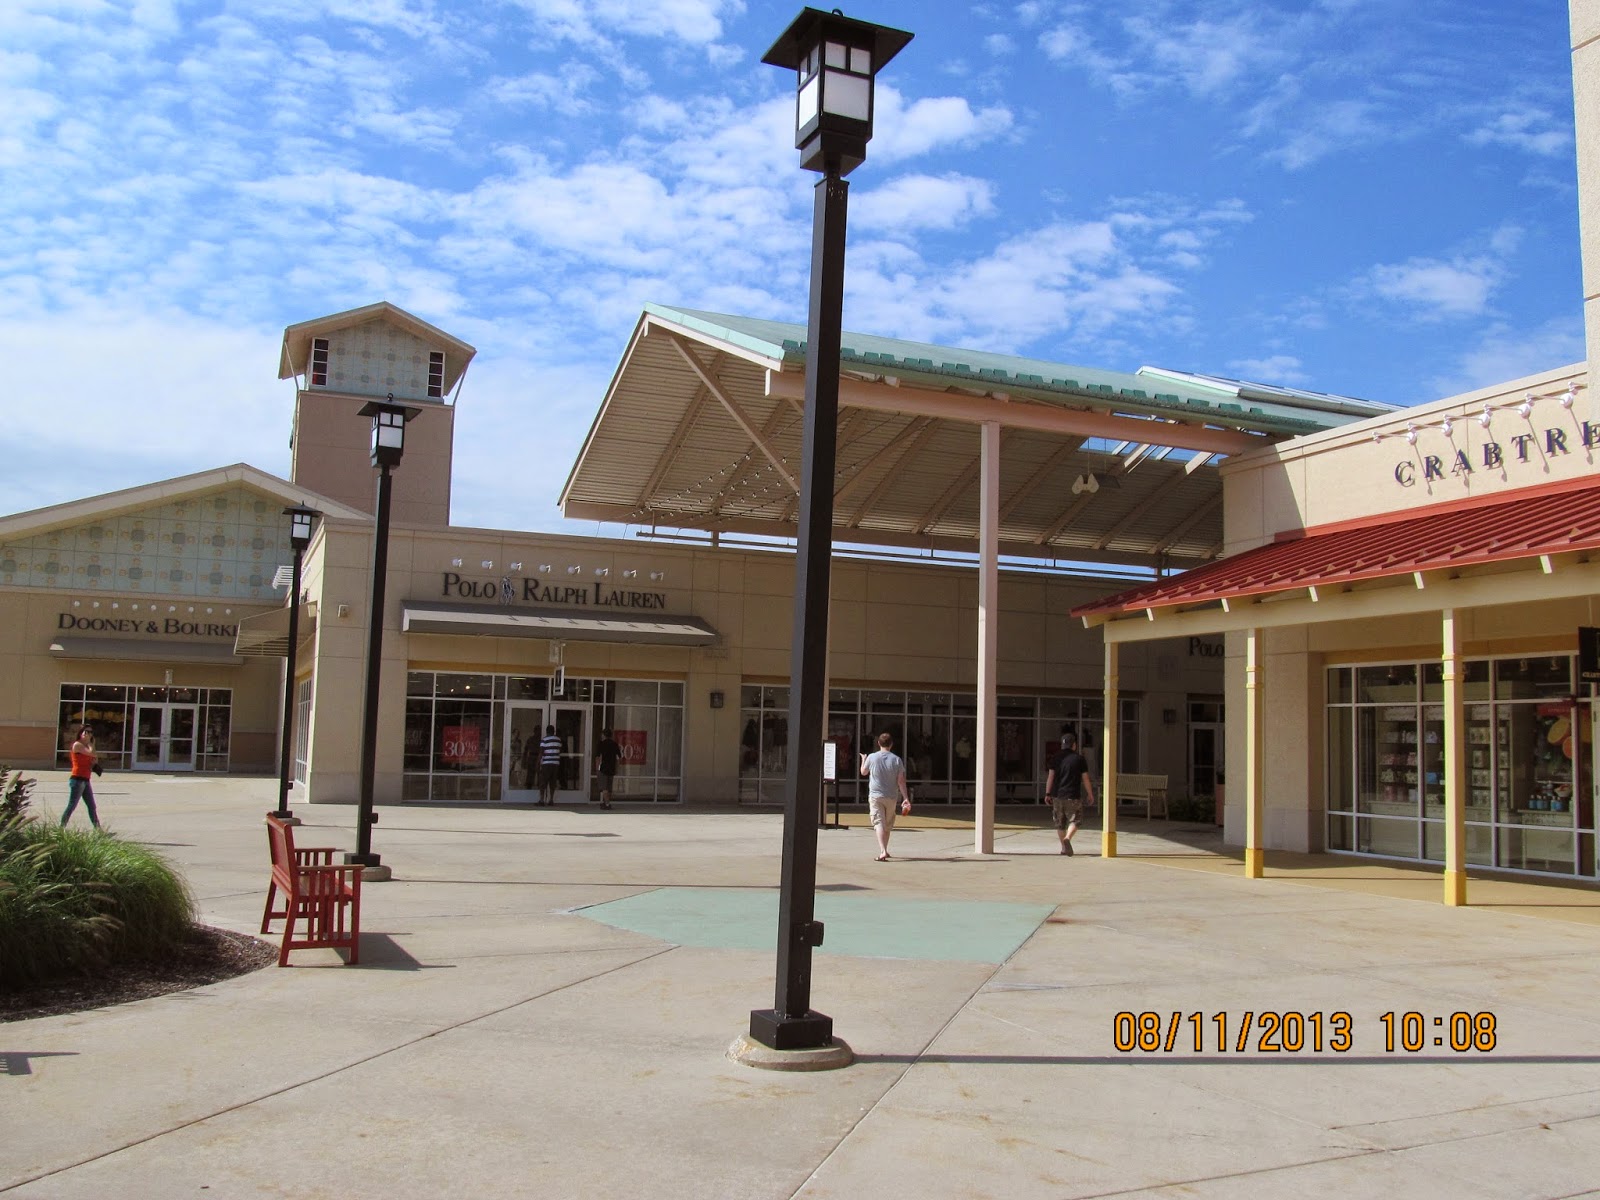 Trip to the Mall: Chicago Premium Outlets- (Aurora, IL)